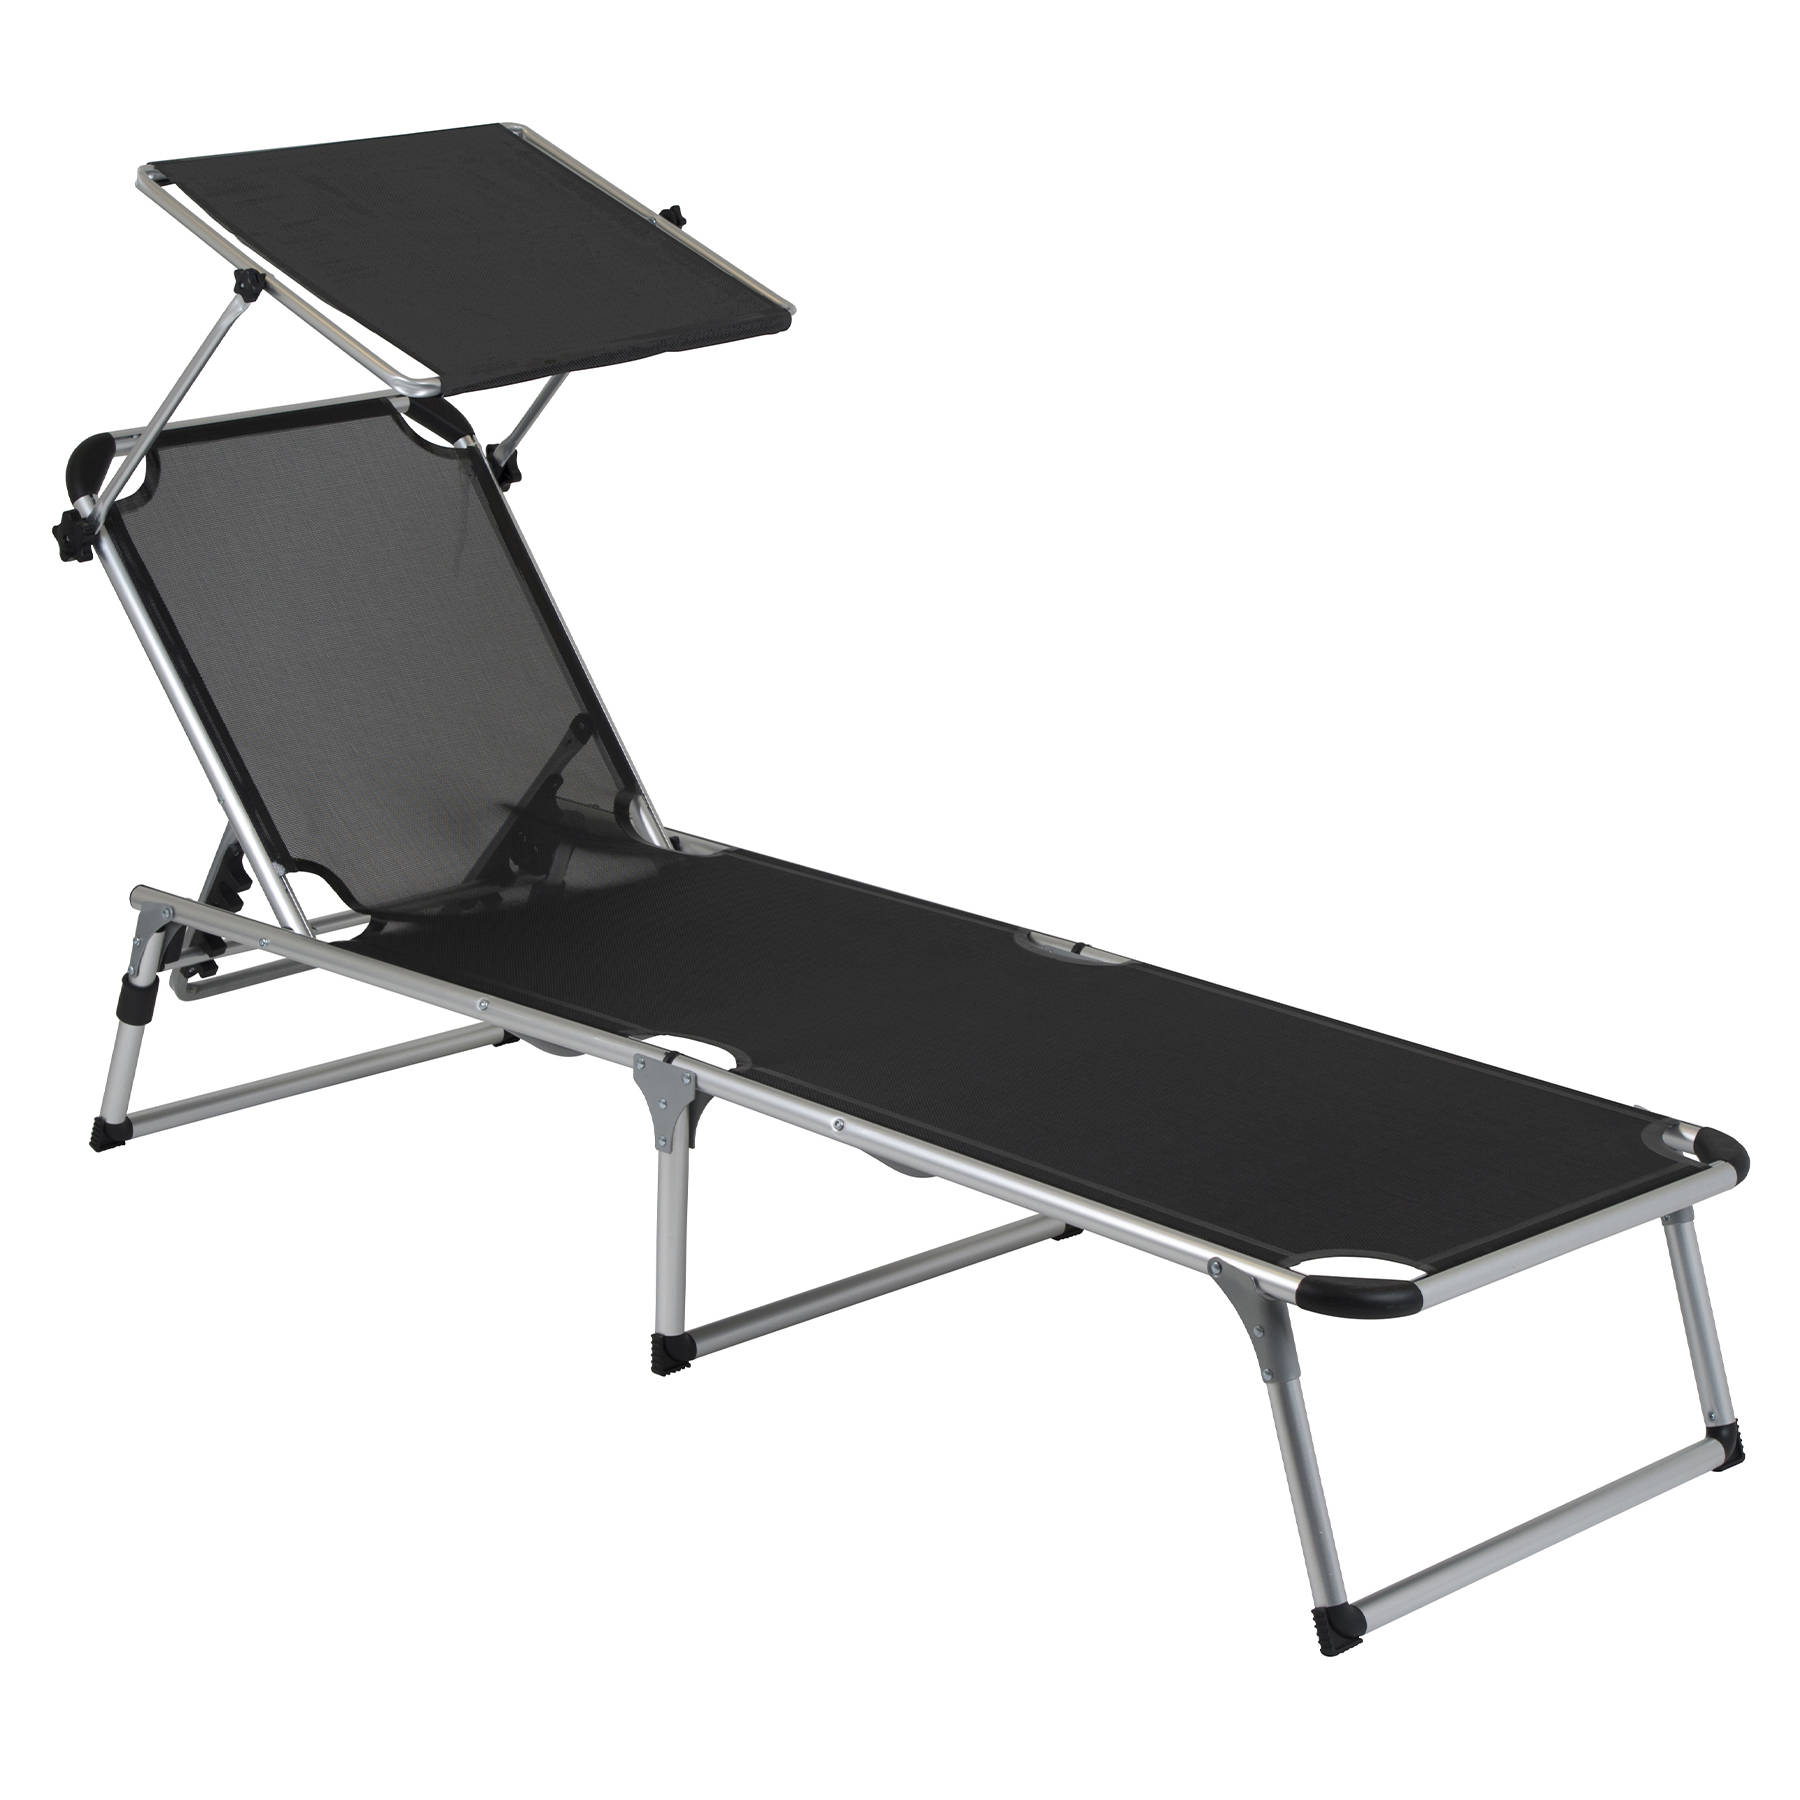 ˳  Bo-Camp Sun lounger With Sunscreen 5 Positions Black (1304460)